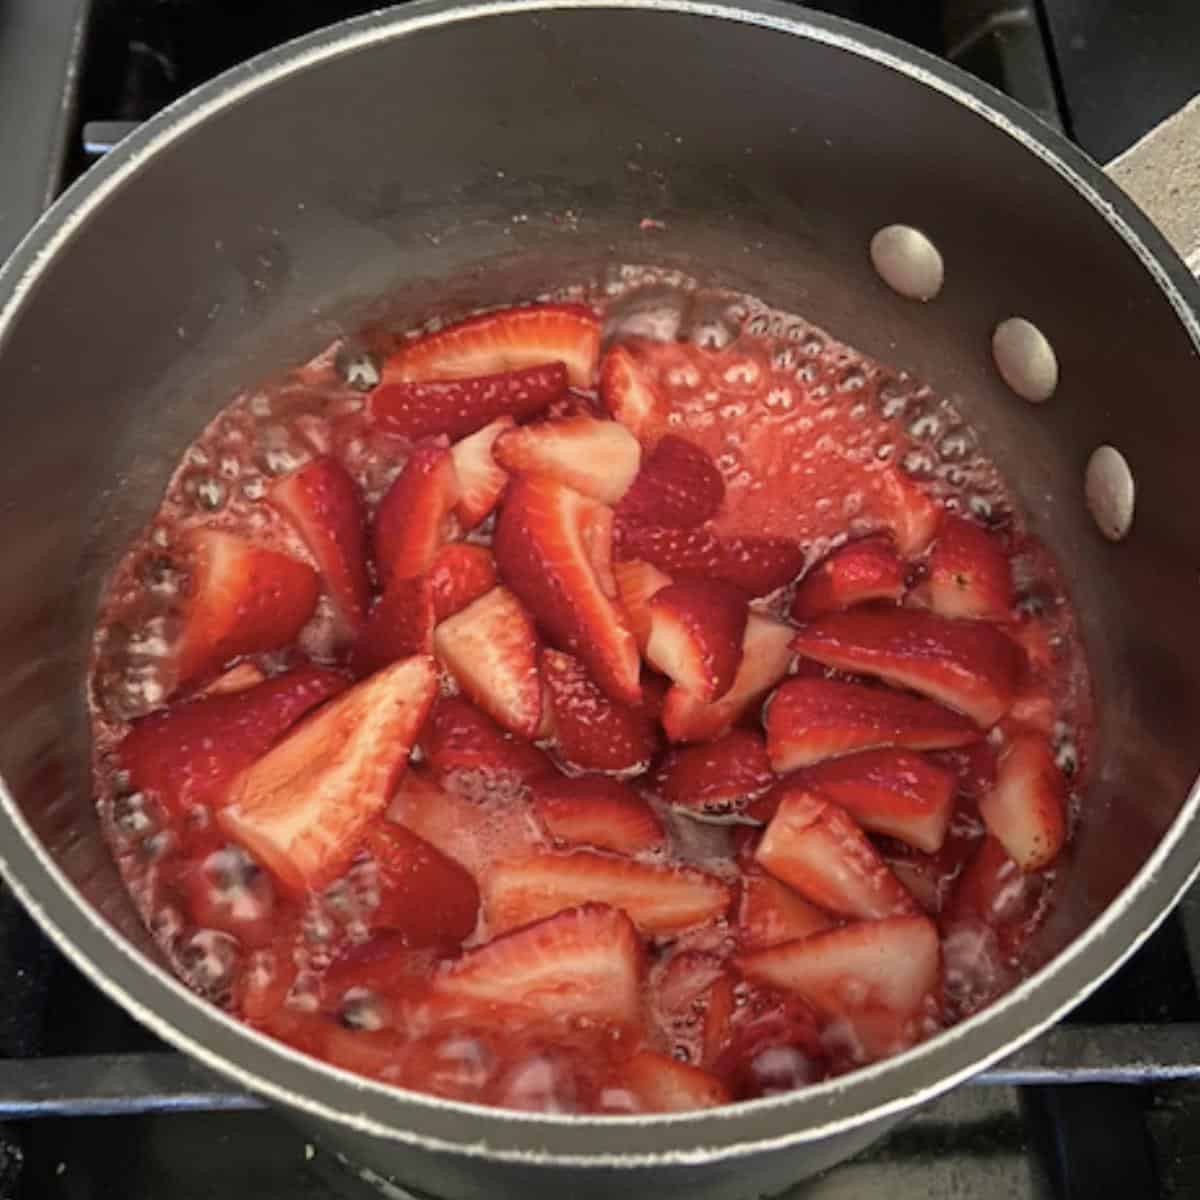 compote coming to a boil in saucepan